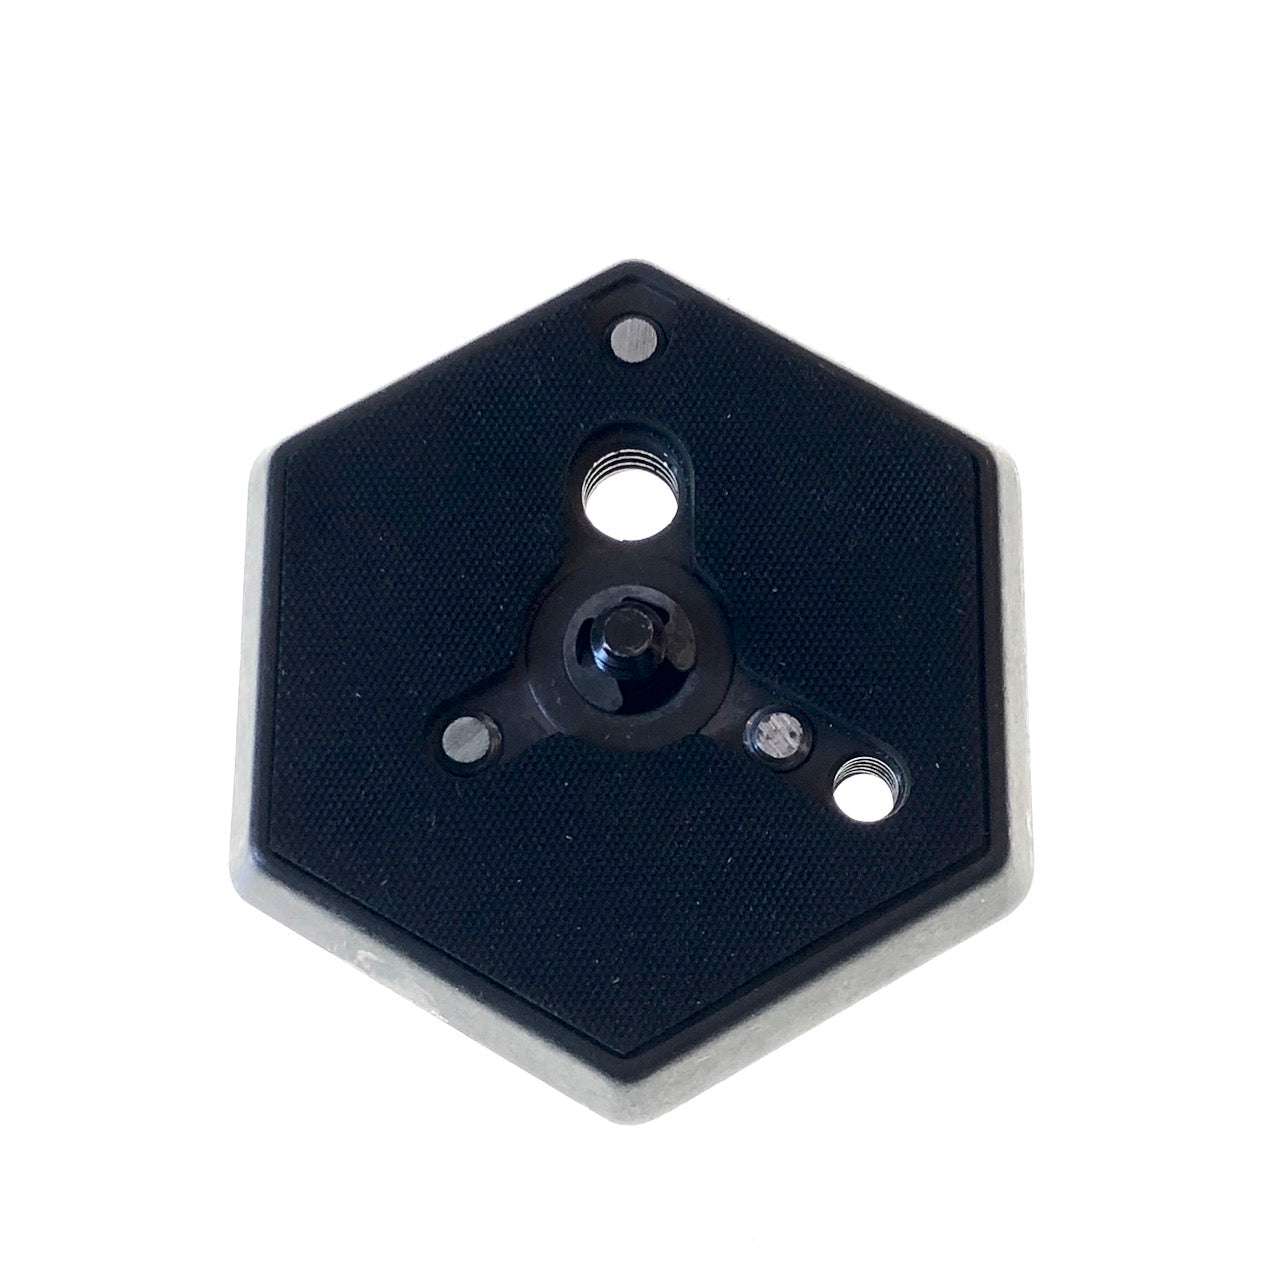 Manfrotto 030-14 hex quick release plate